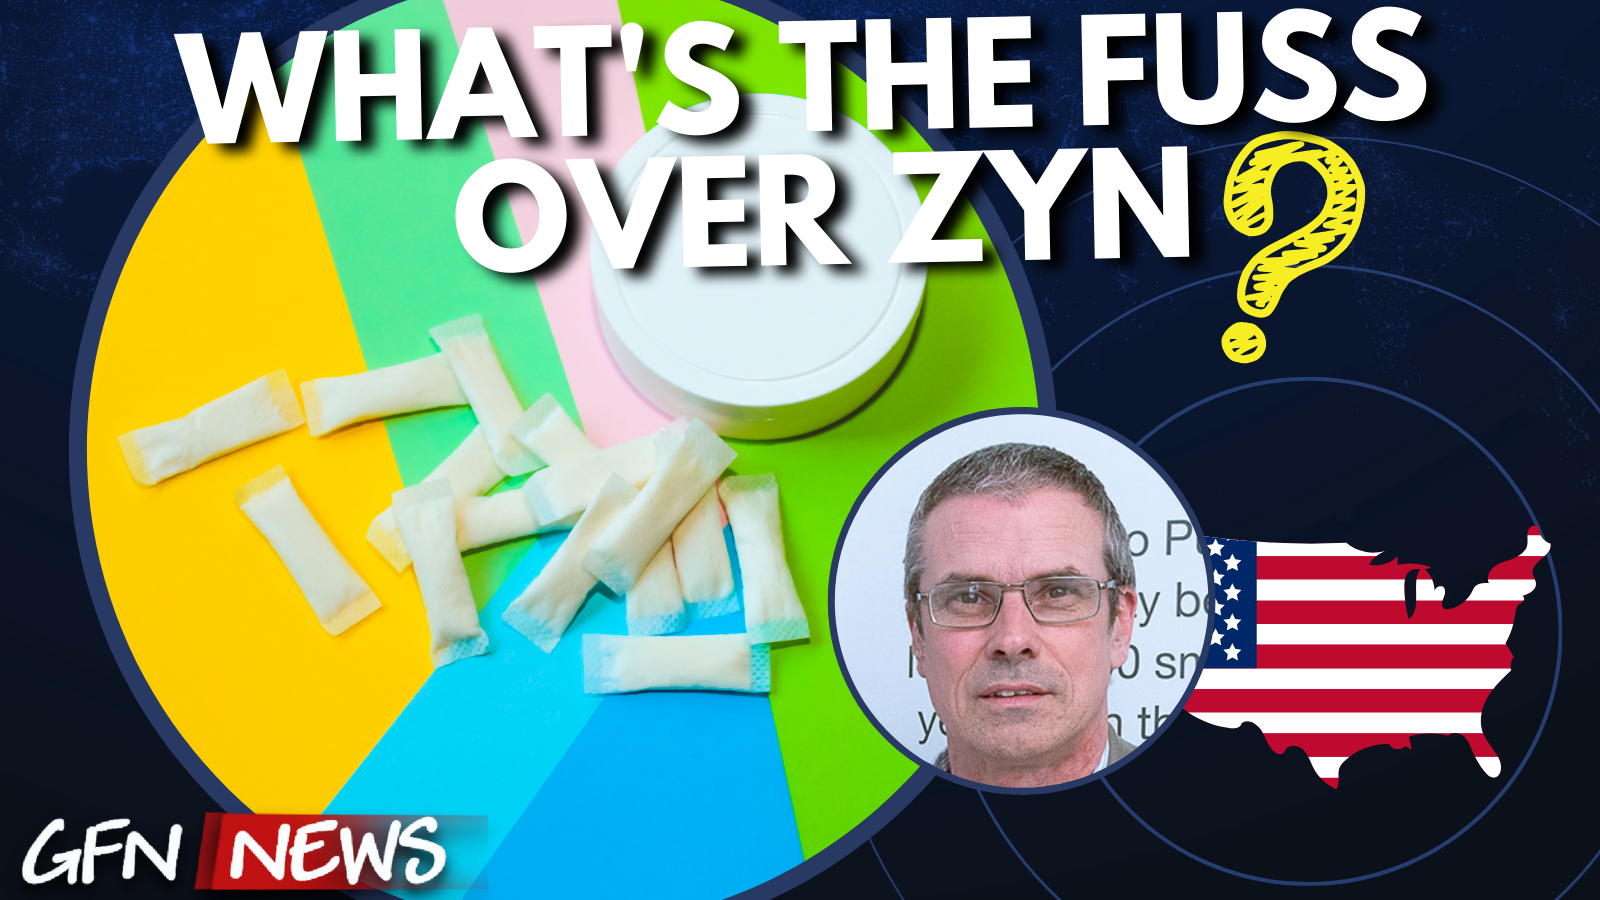 GFN News #99 | WHAT'S THE FUSS OVER ZYN? | Cullip tackles the rise of nicotine pouches in the USA